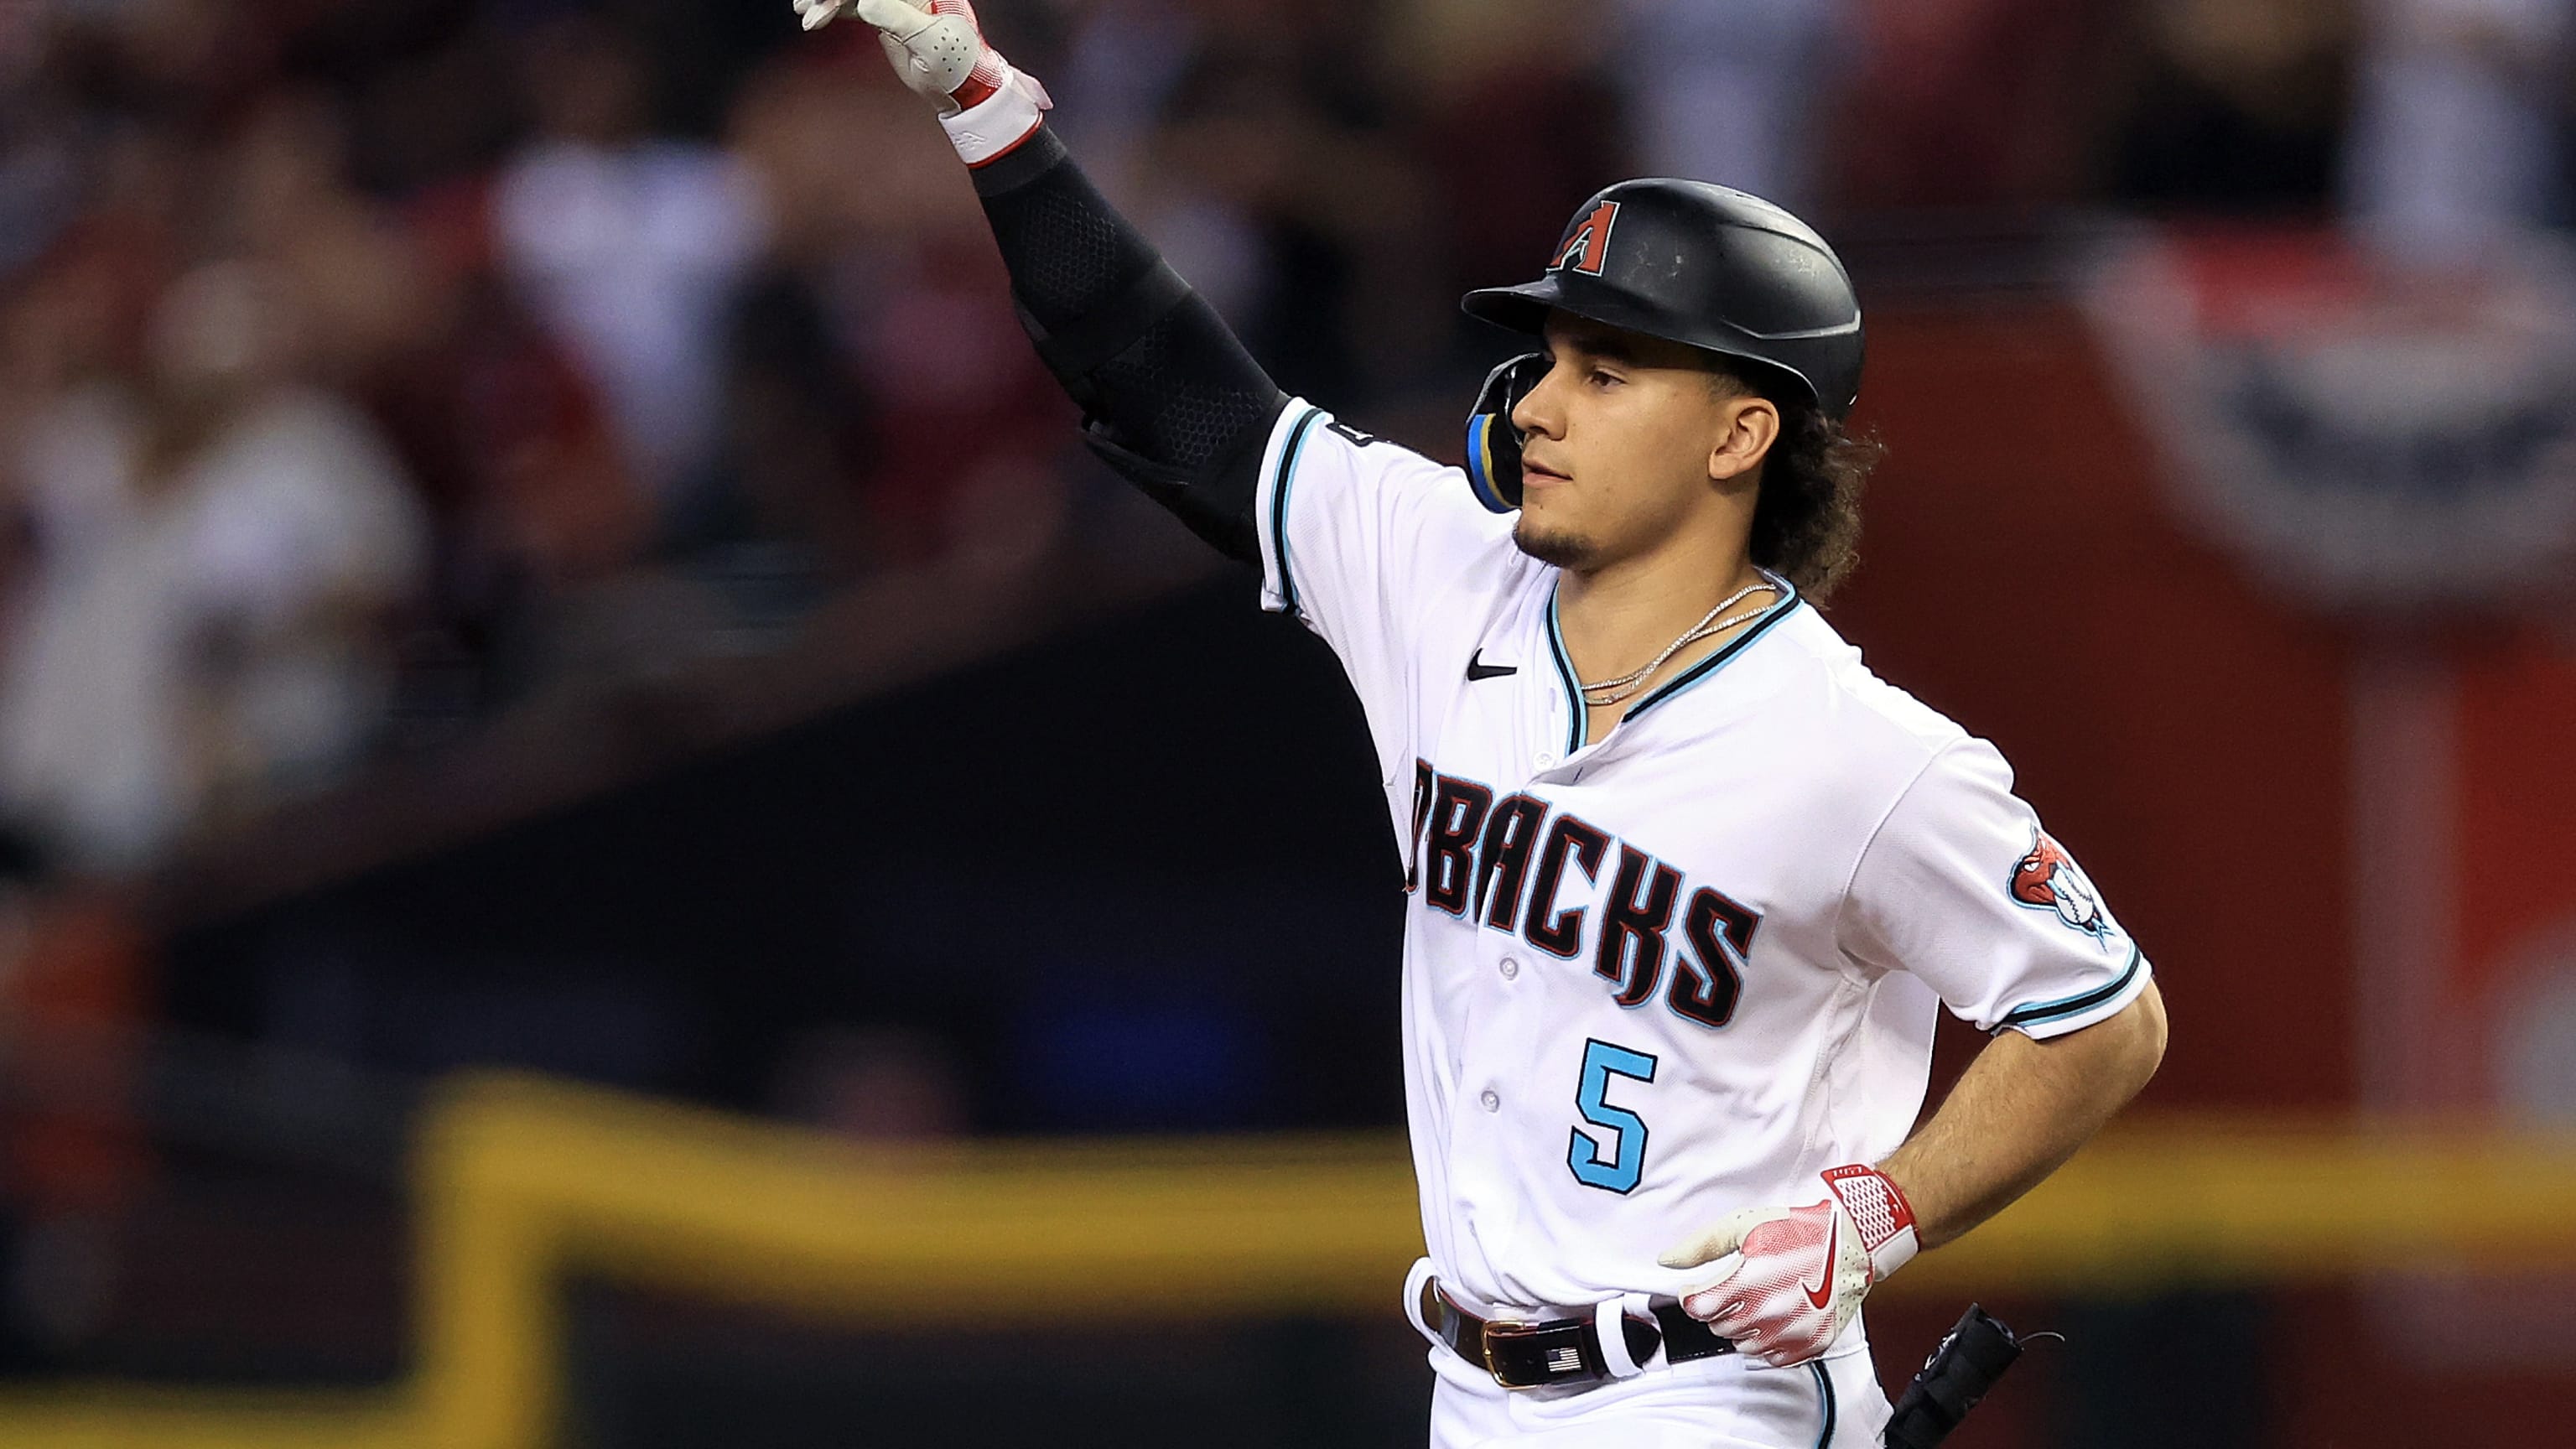 Everything comes back in a circle' for D-backs prospect Alek Thomas - PHNX